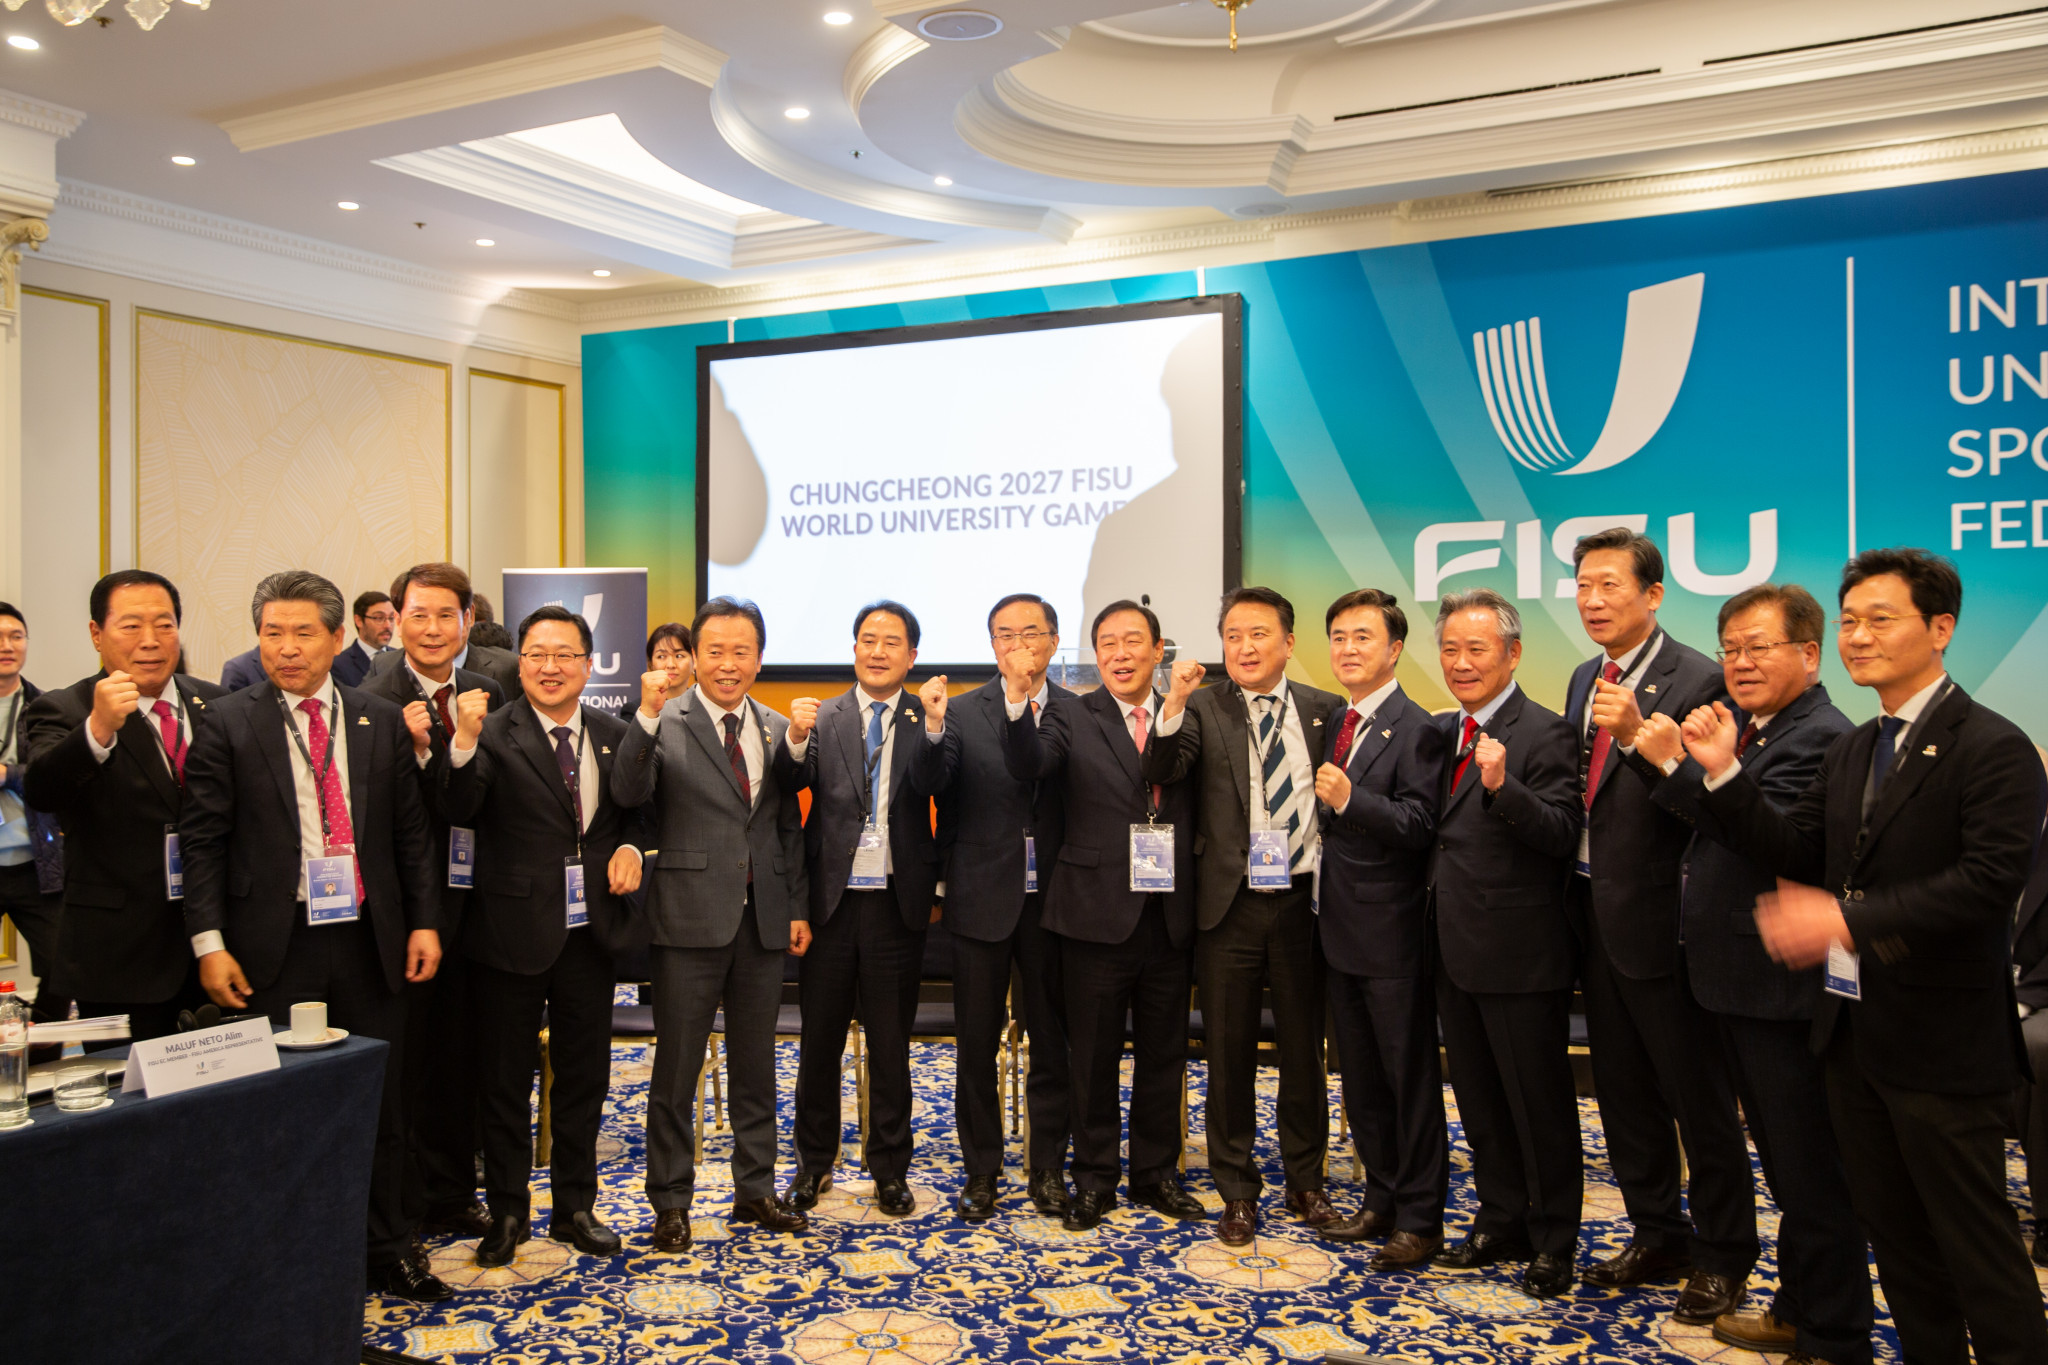 Chungcheong leaders express concern over lack of Organising Committee for 2027 Summer World University Games